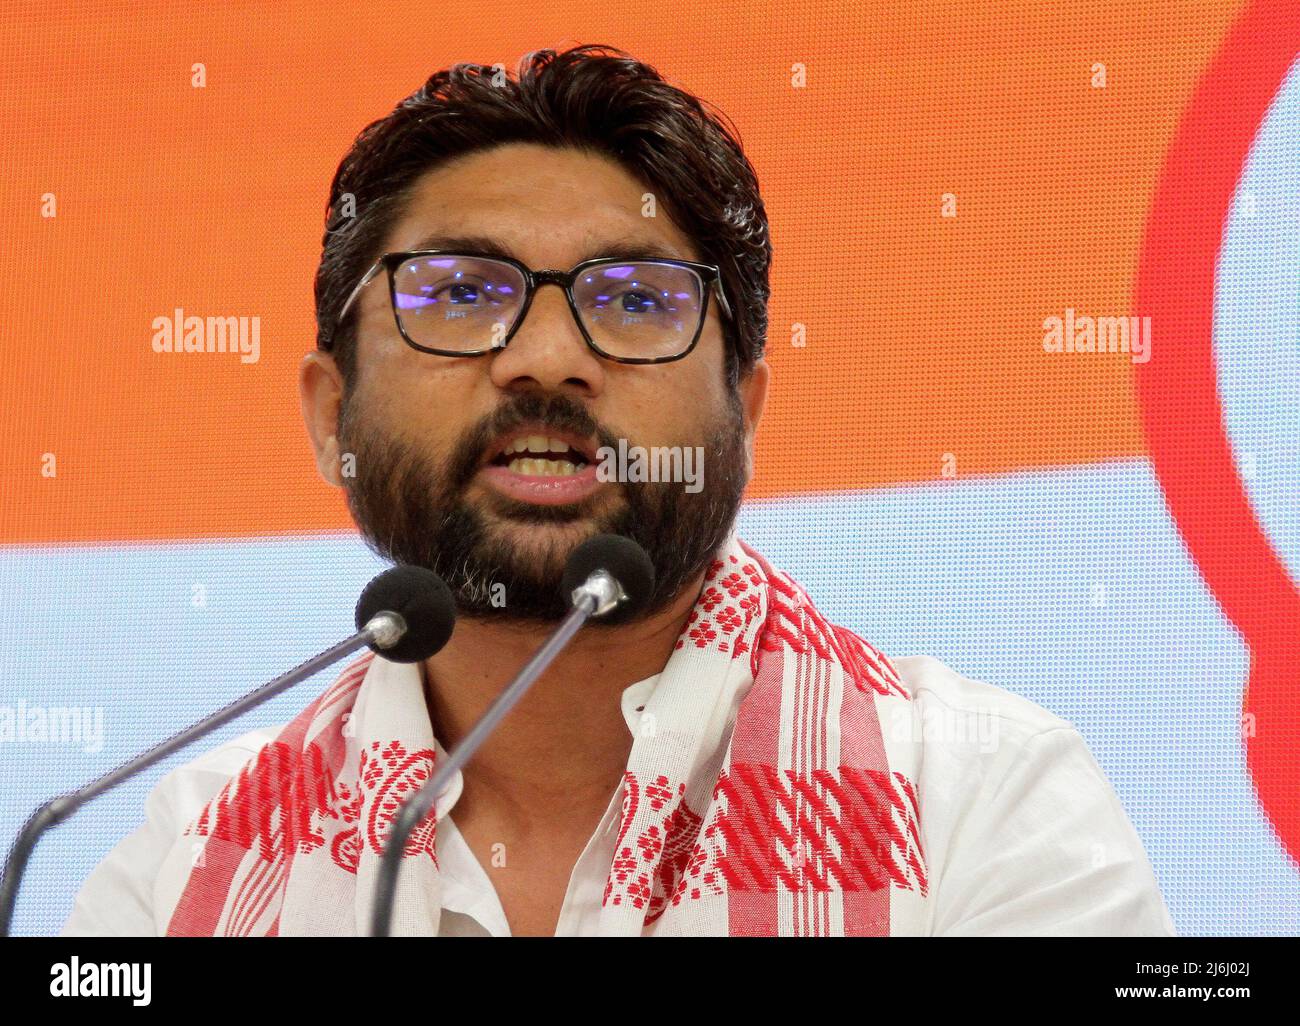 Gujrat independent MLA (Member of Legislative Assembly) Jignesh Mevani address to the media during a press conference at the Indian National Congress party headquarter in New Delhi. After he was released on bail over two cased filed on April 20, 2022 and April 25, 2022 in Assam State. He told the media it was pre planned conspiracy to destroy him and also slammed the central Prime Minister Narendra Modi's government. (Photo by Naveen Sharma / SOPA Images/Sipa USA) Stock Photo